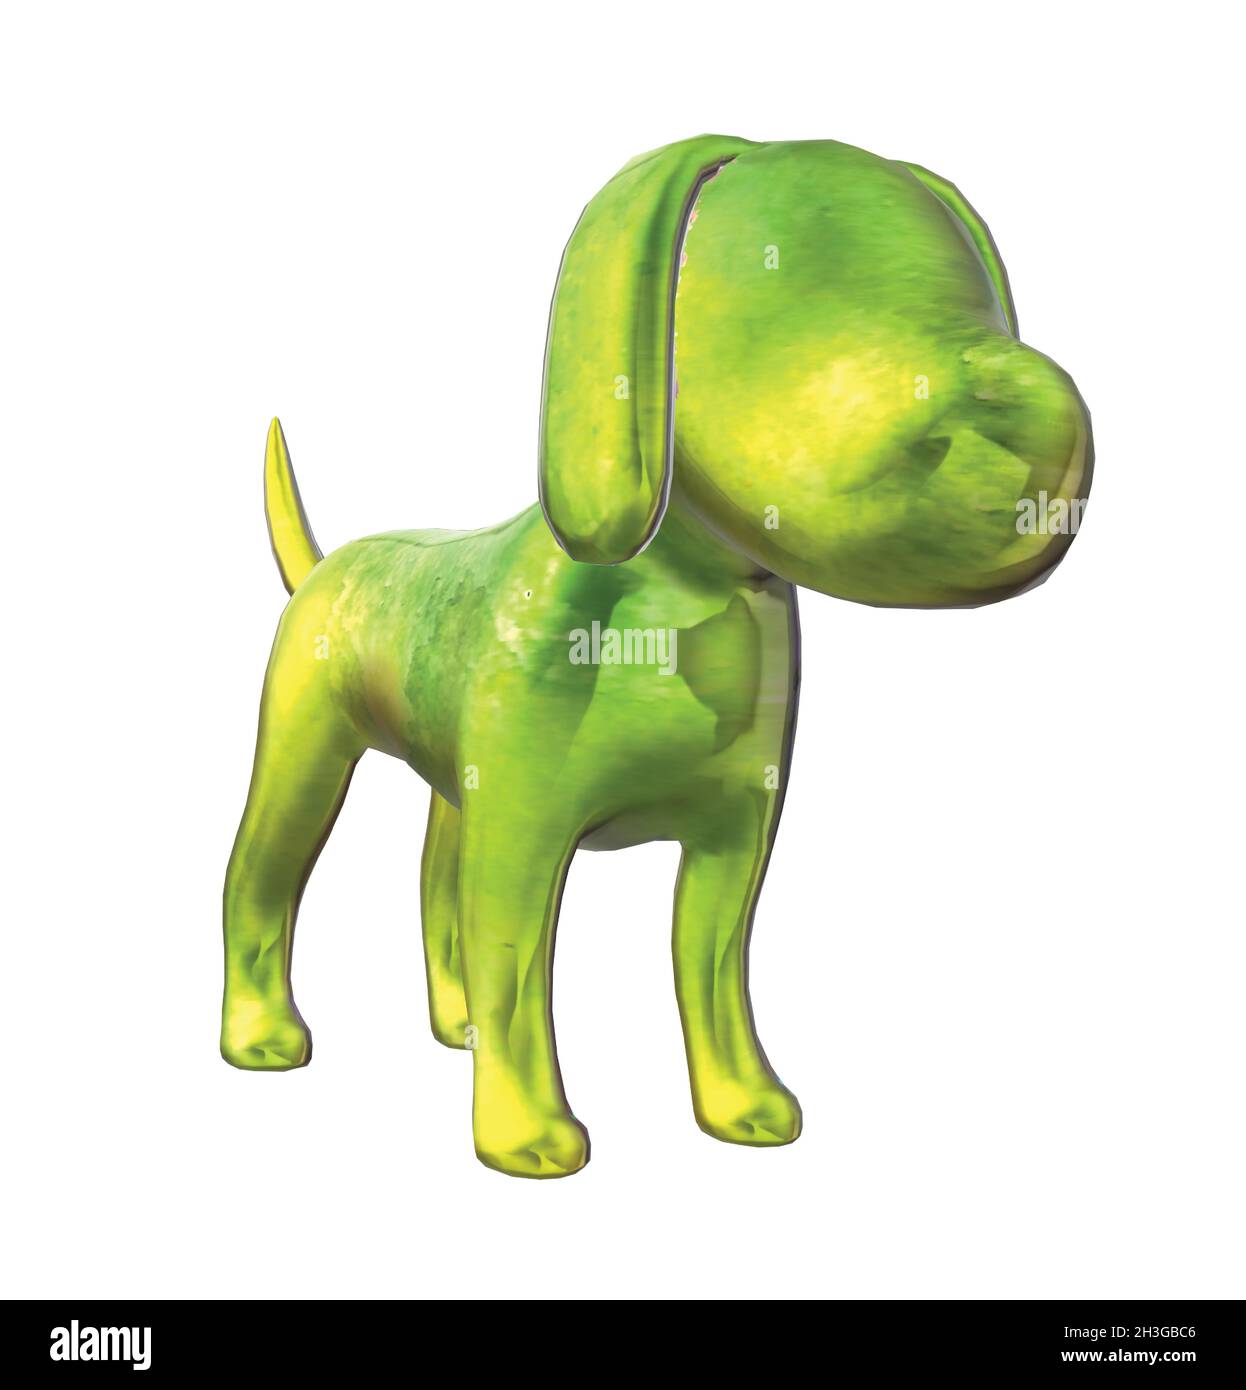 Shiny Glossy Green and Yellow Colored Dog Puppy Statue Stock Vector